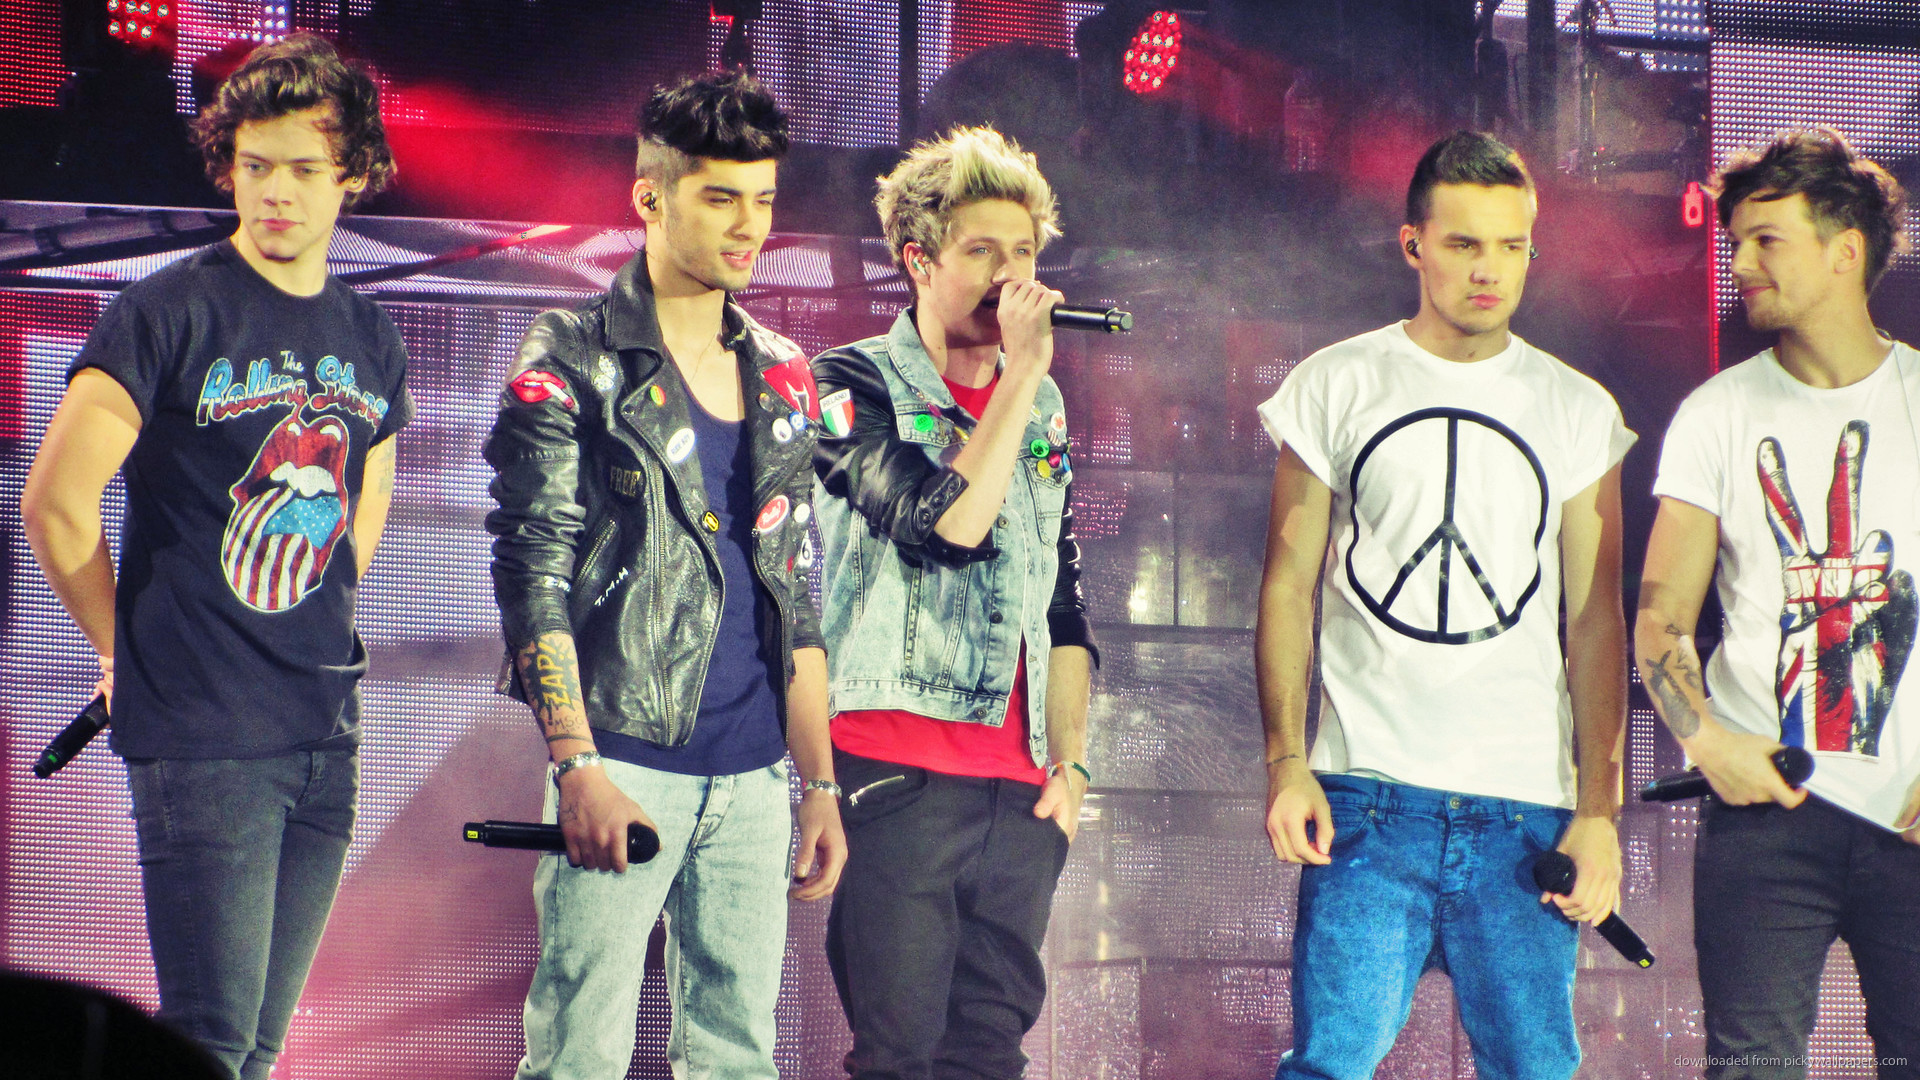 1920x1080 9. one direction wallpaper9